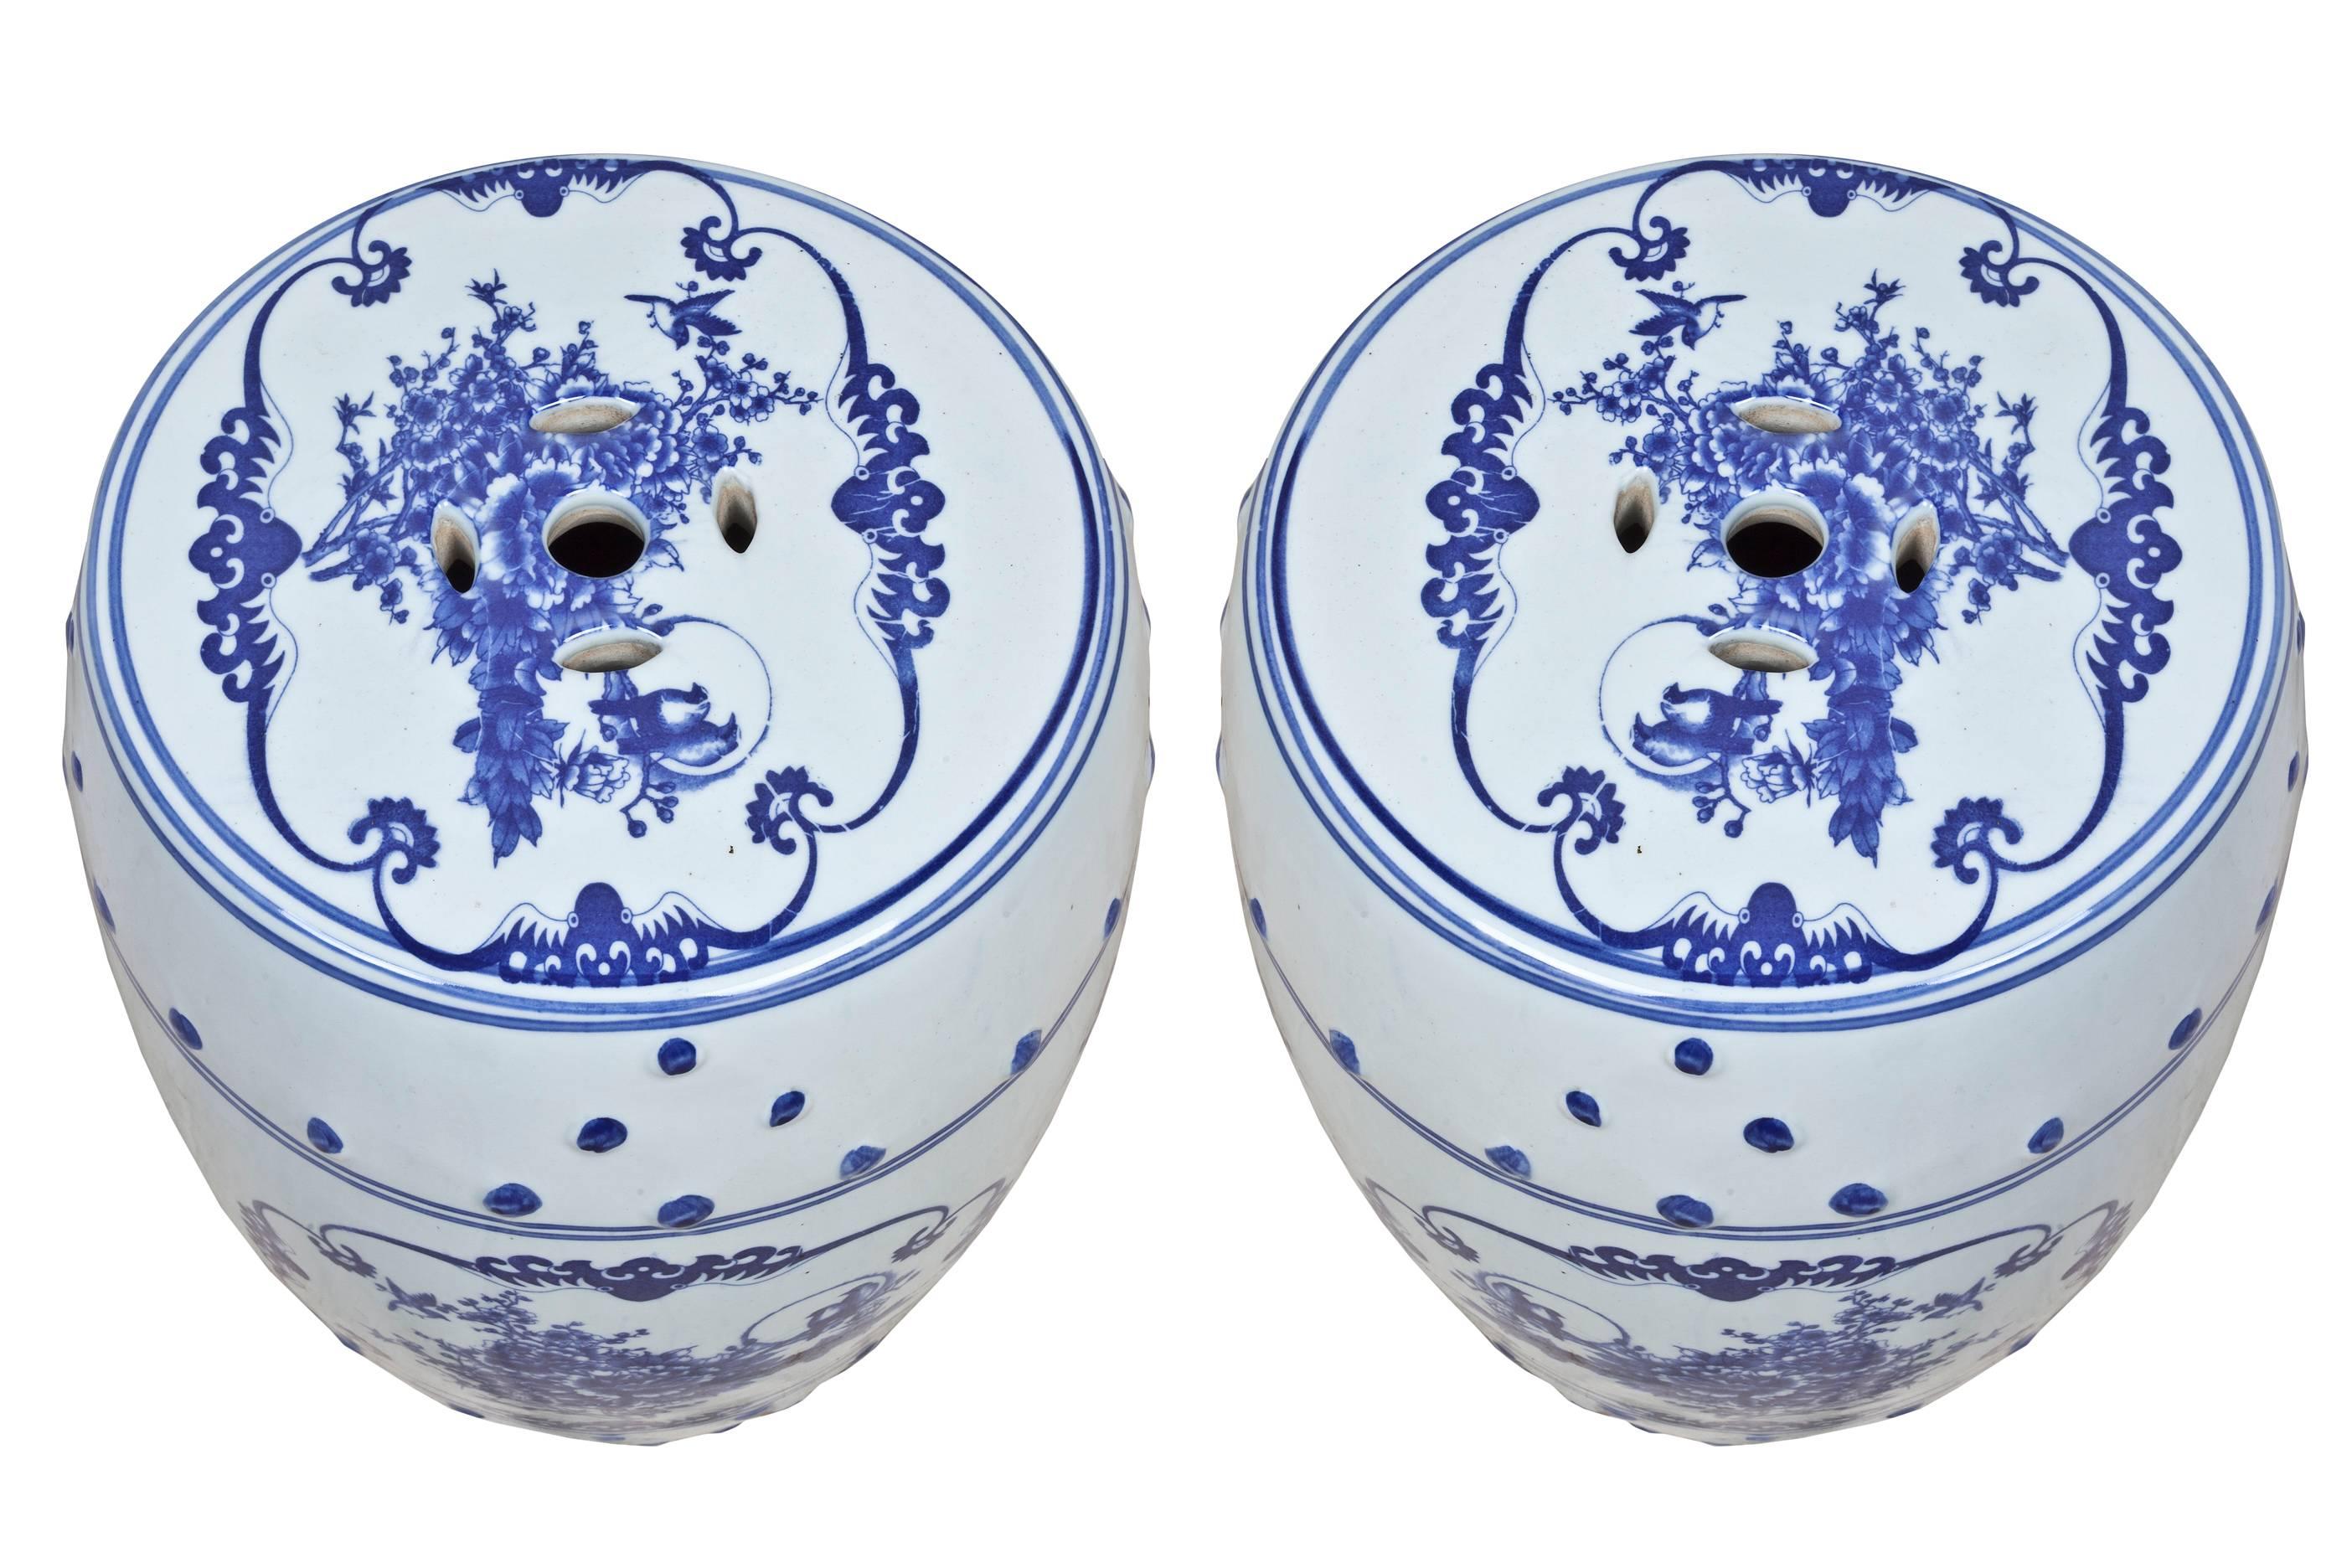 Pair of blue and white Chinese porcelain garden seats or side tables with floral motif, mid-1900s. Excellent condition.